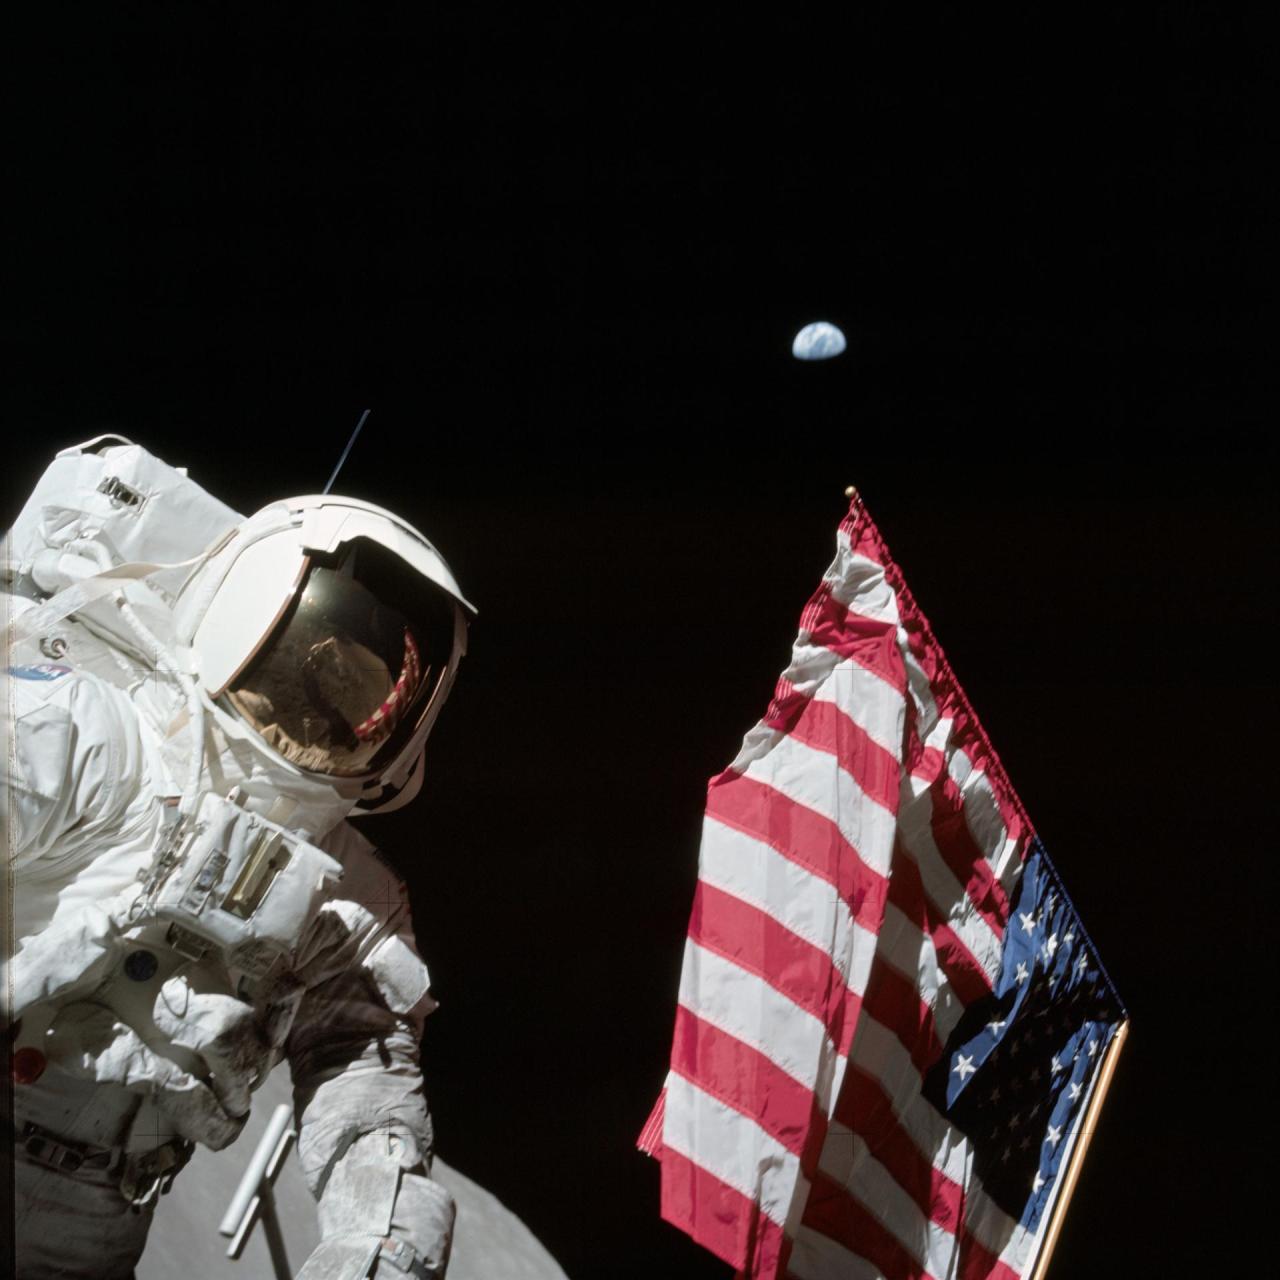 Astronaut Harrison Schmitt poses in a bulky white spacesuit on the Lunar surface next to an American flag. The Earth hangs in the black sky in the background, and fellow astronaut Eugene Cernan is seen in the reflection of Schmitt's golden visor. Credit: NASA